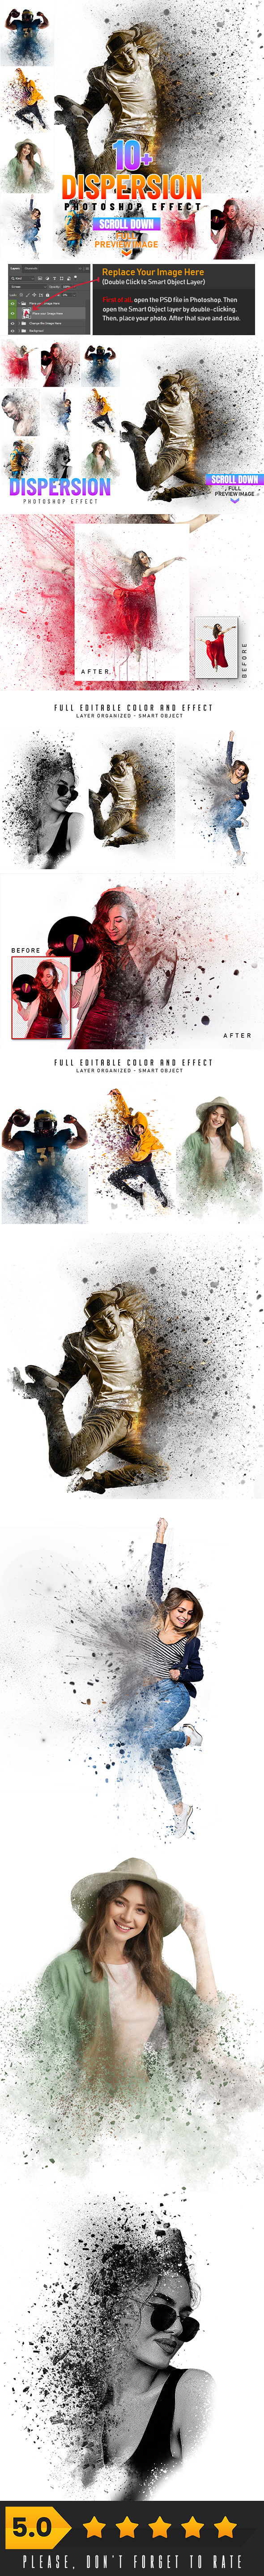 [DOWNLOAD]Dispersion Photo Effect Template